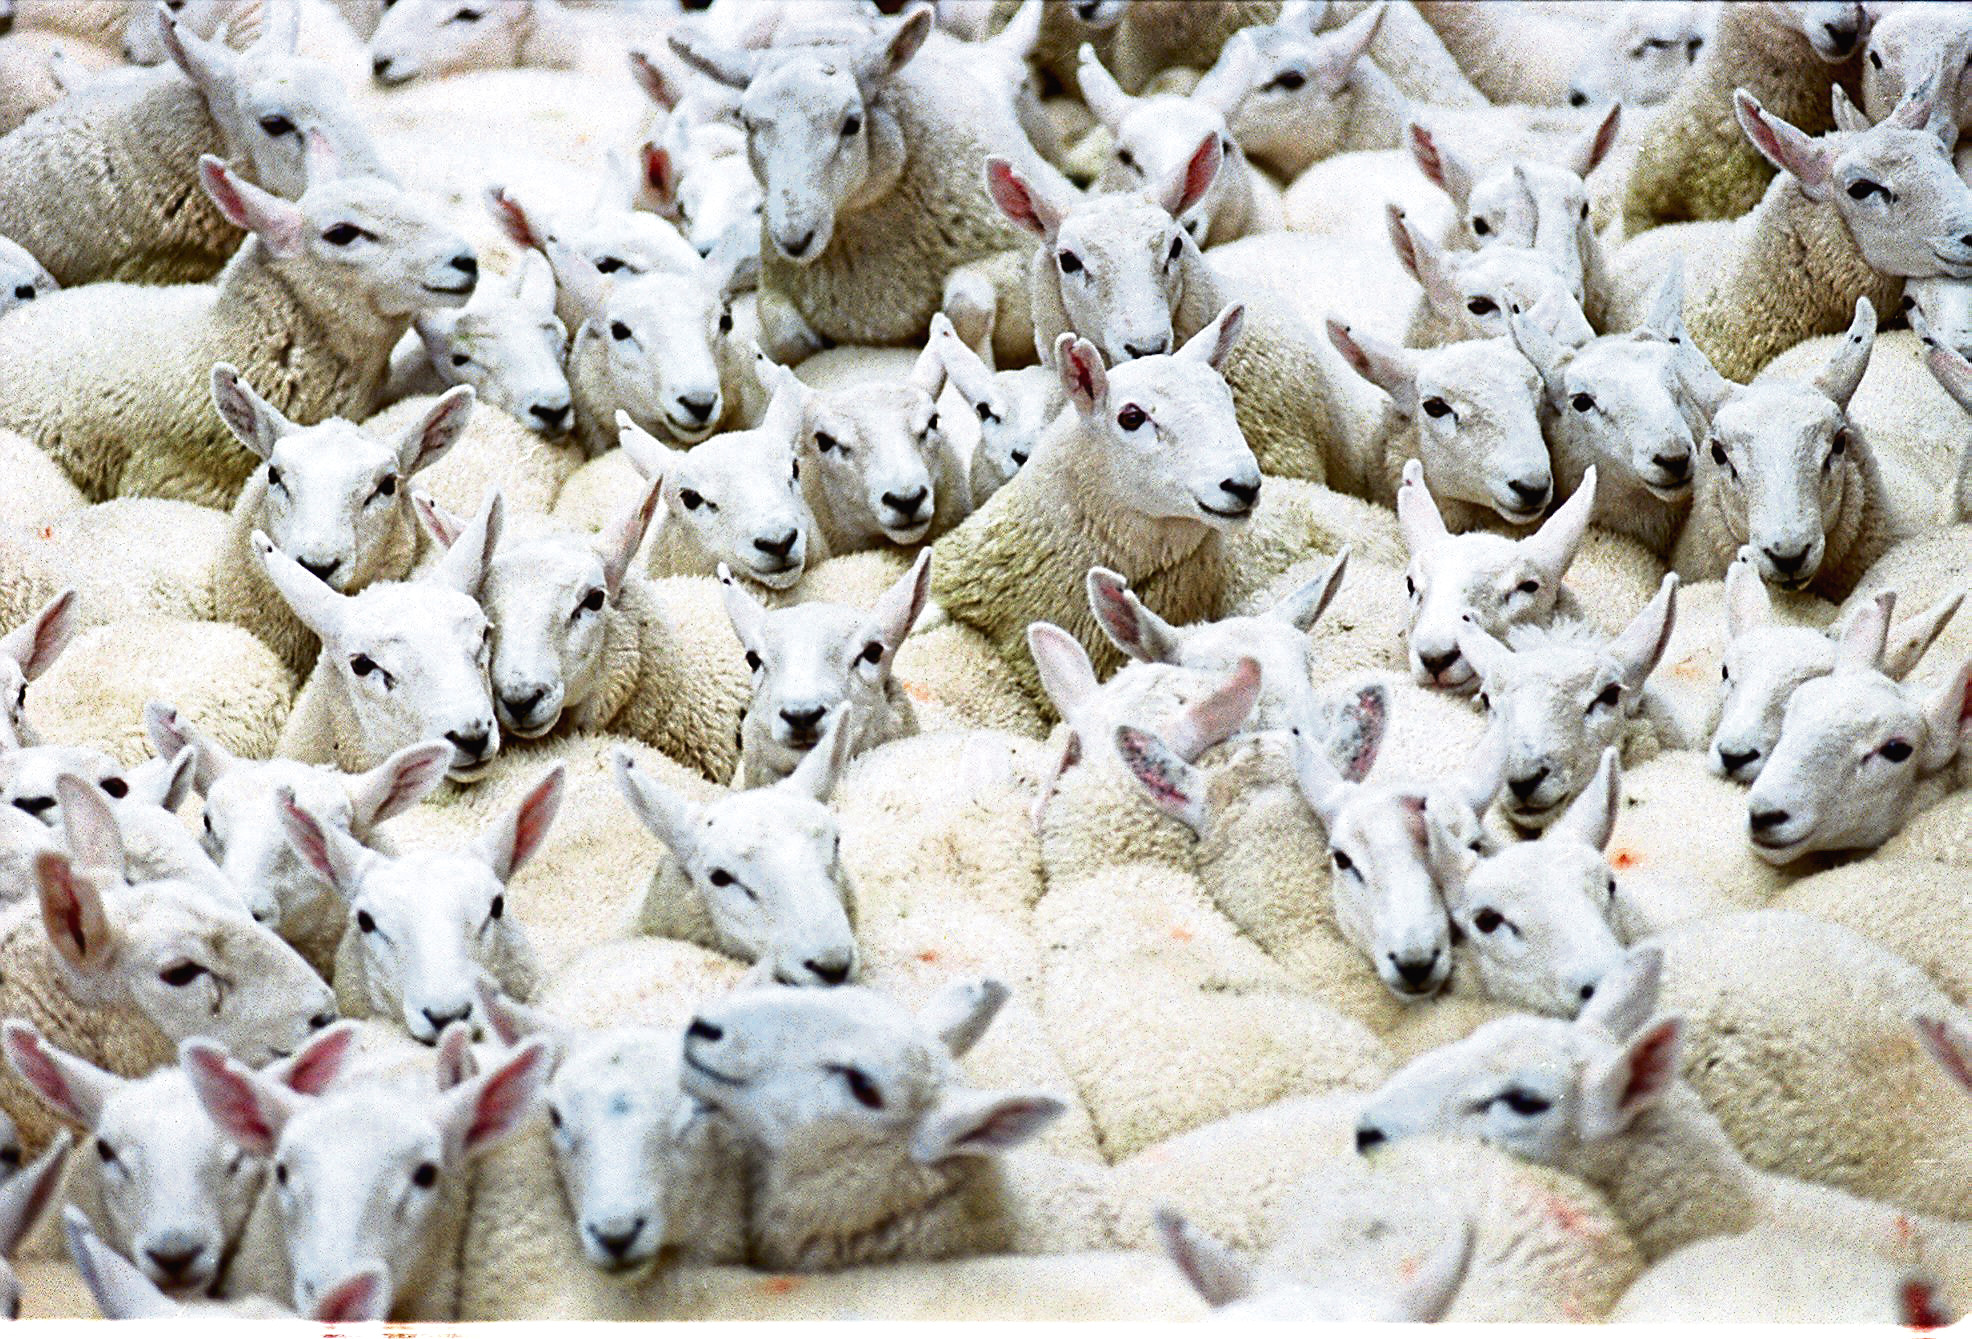 Liveweight price drop fuelled by high feed costs and supply of New Zealand lamb into Britain